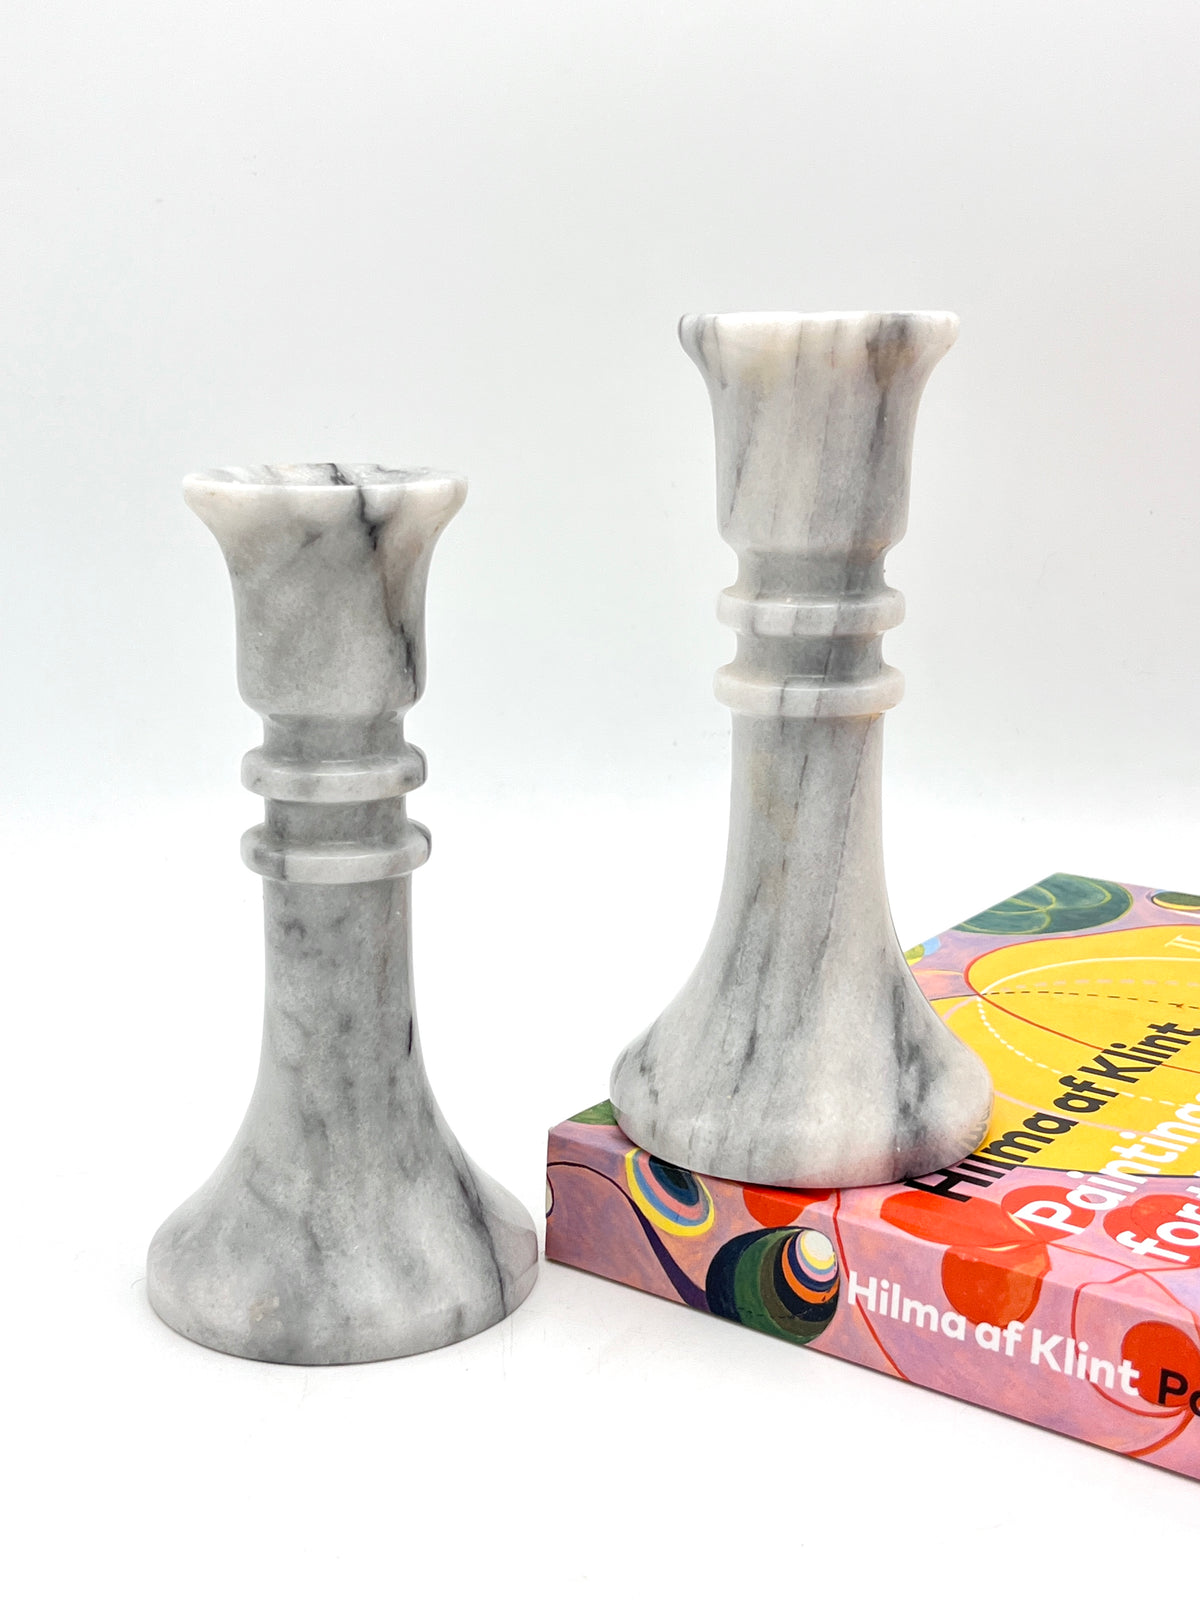 Marble Candle Holder, Accessories